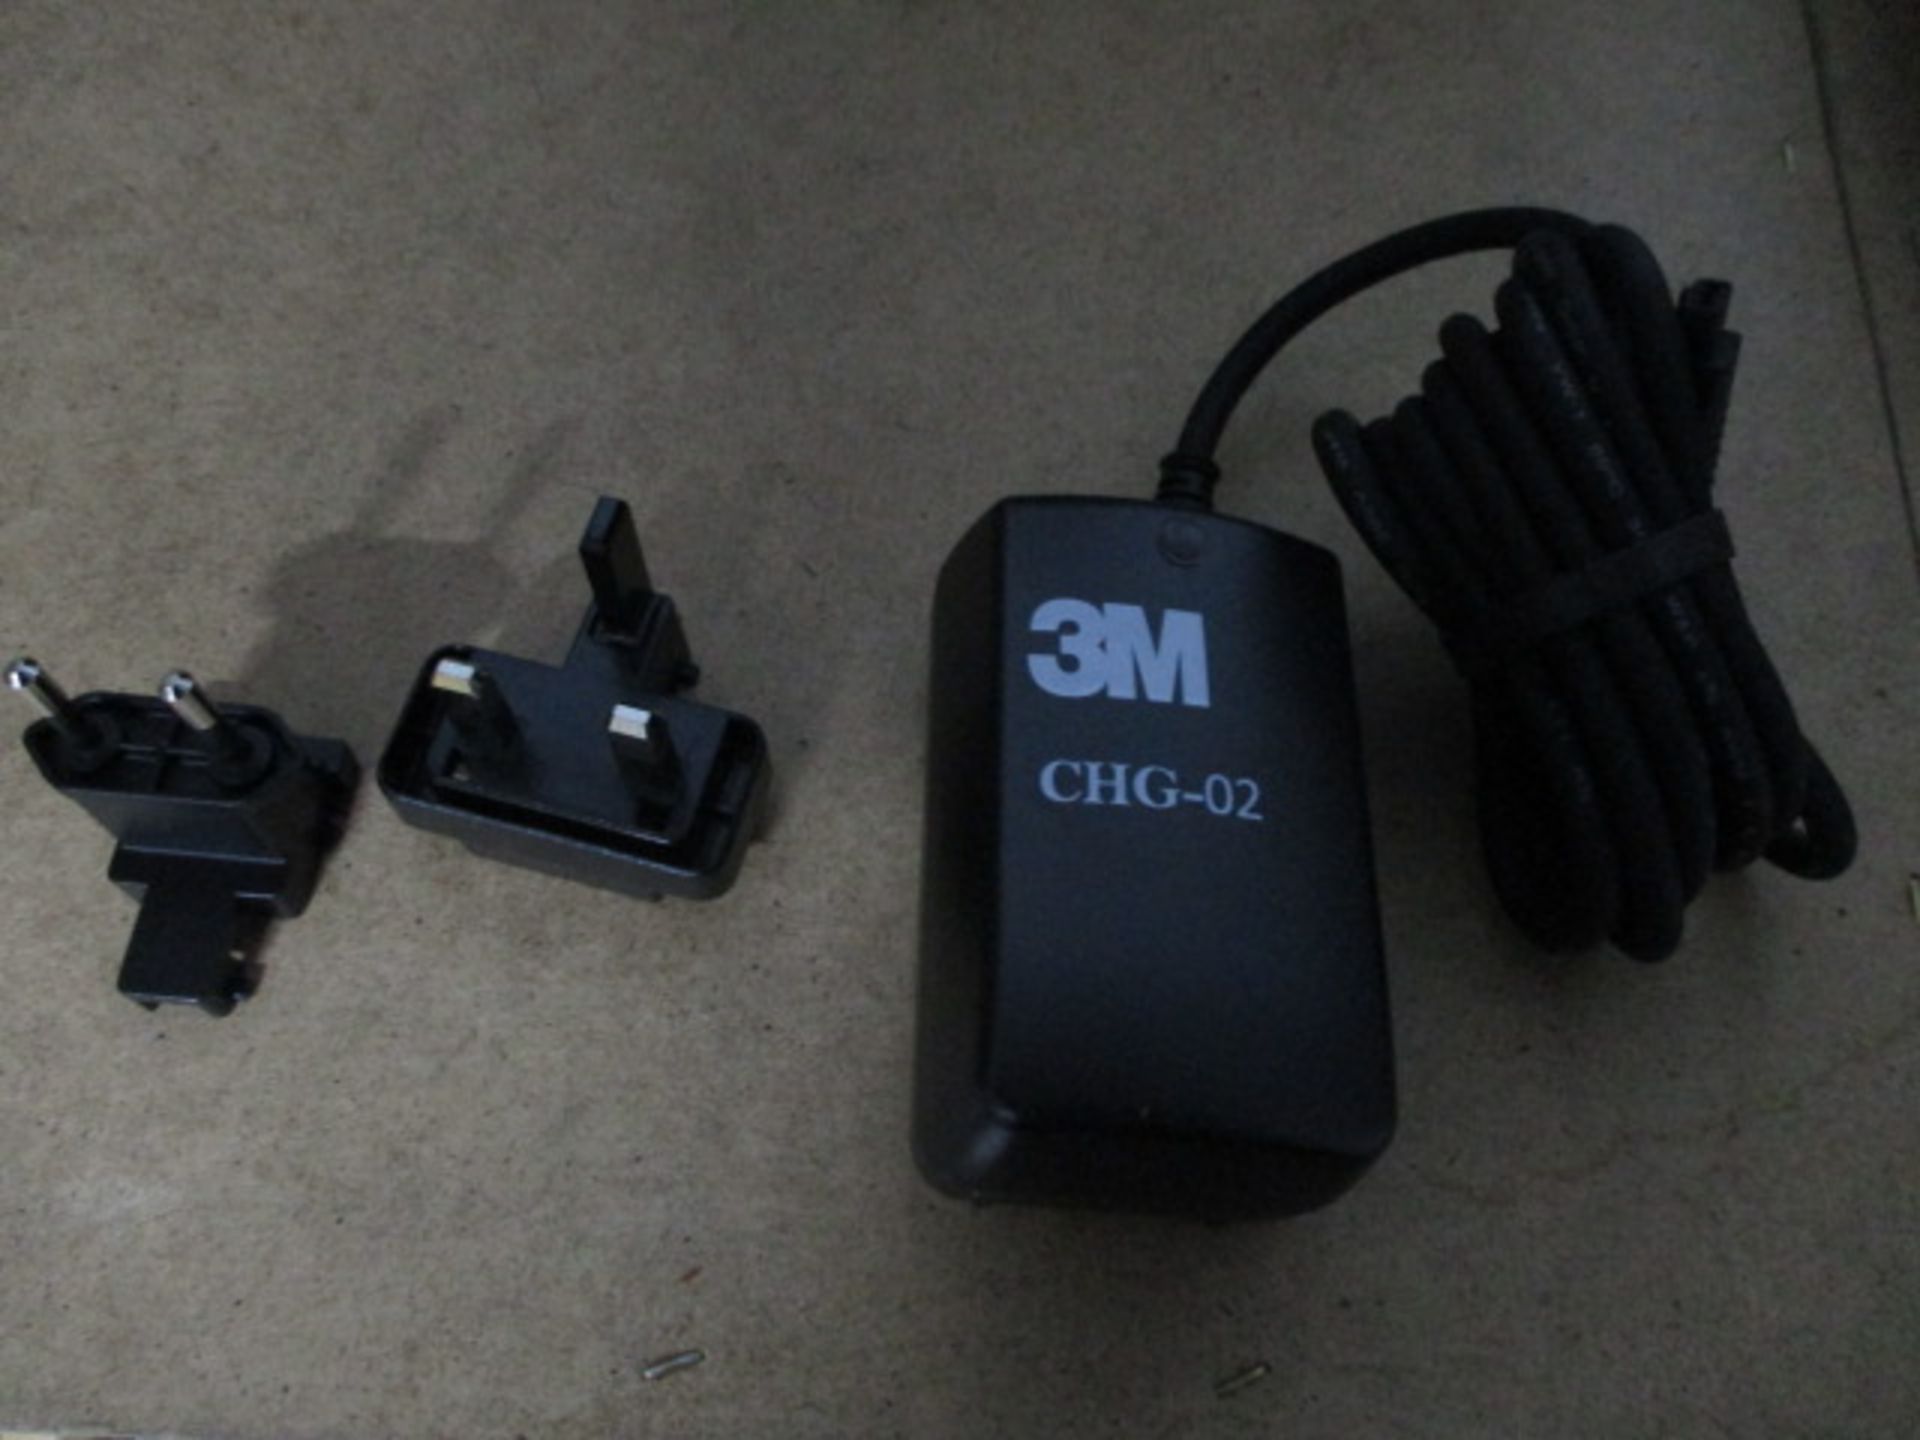 3M battery chargers - Image 3 of 4